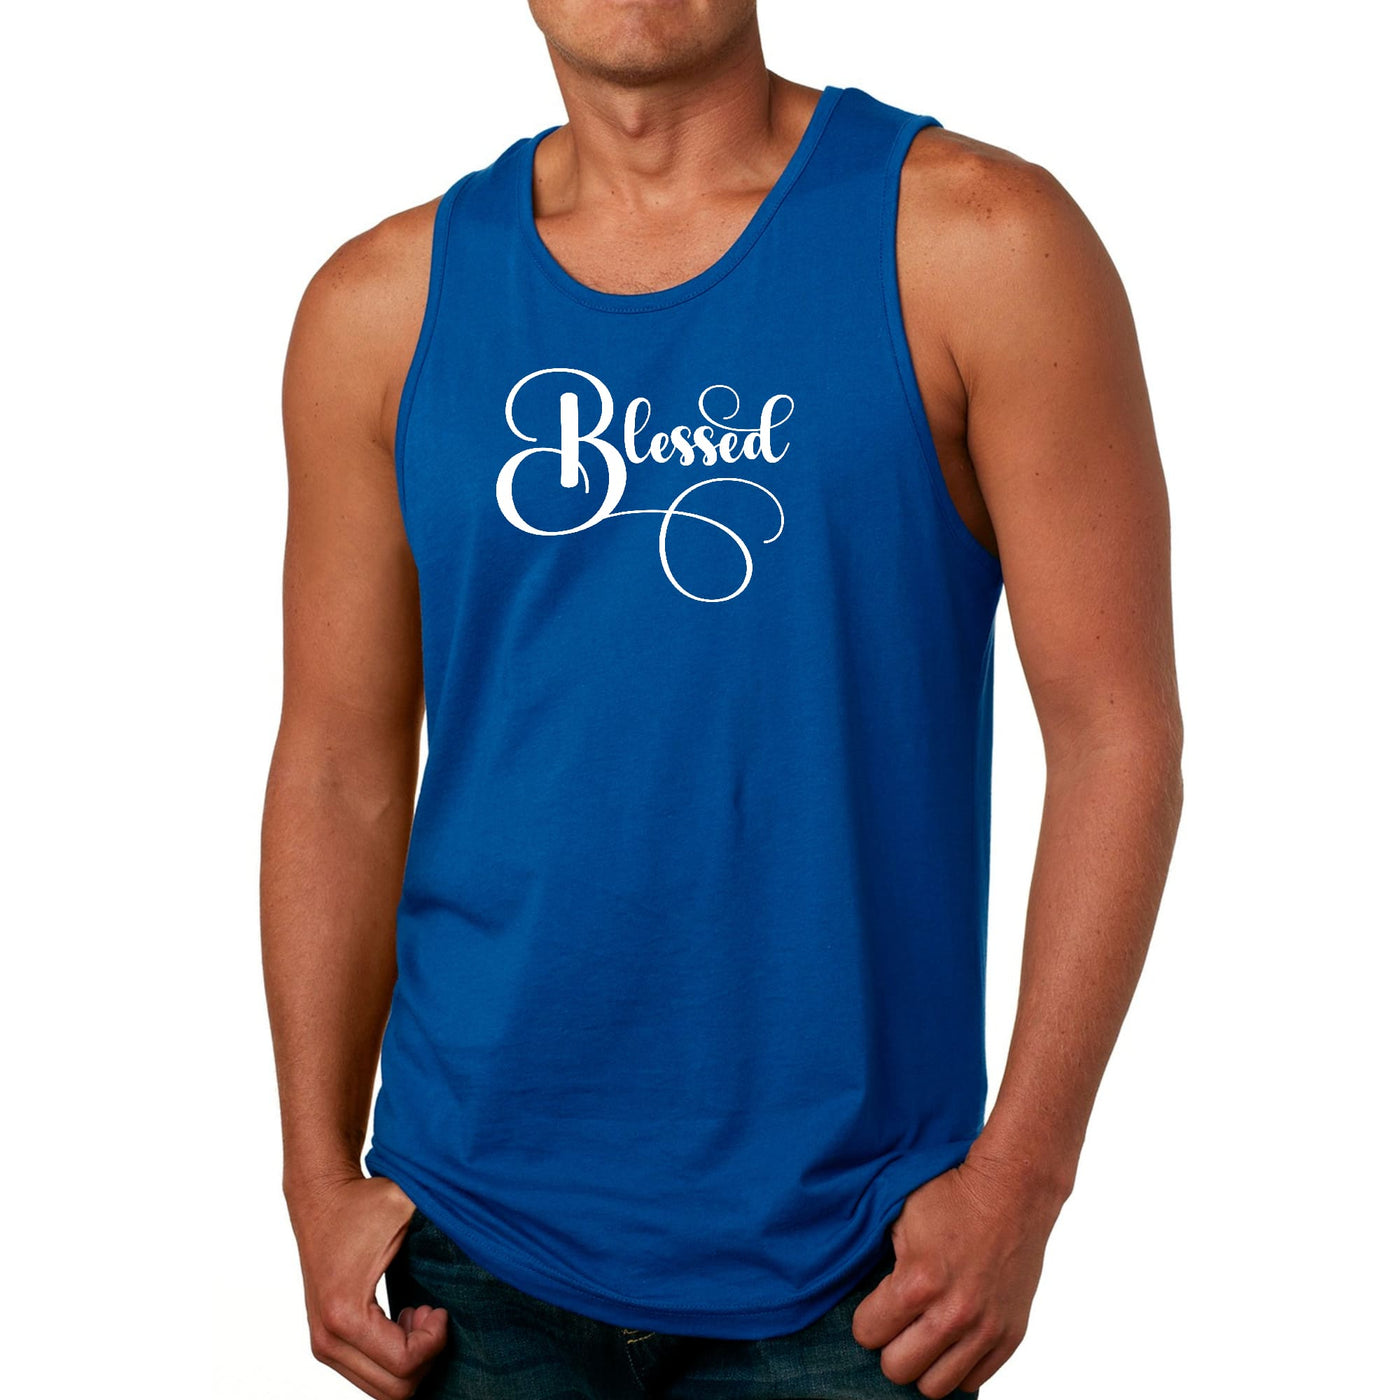 Mens Fitness Tank Top Graphic T-shirt Blessed Graphic Illustration - Mens